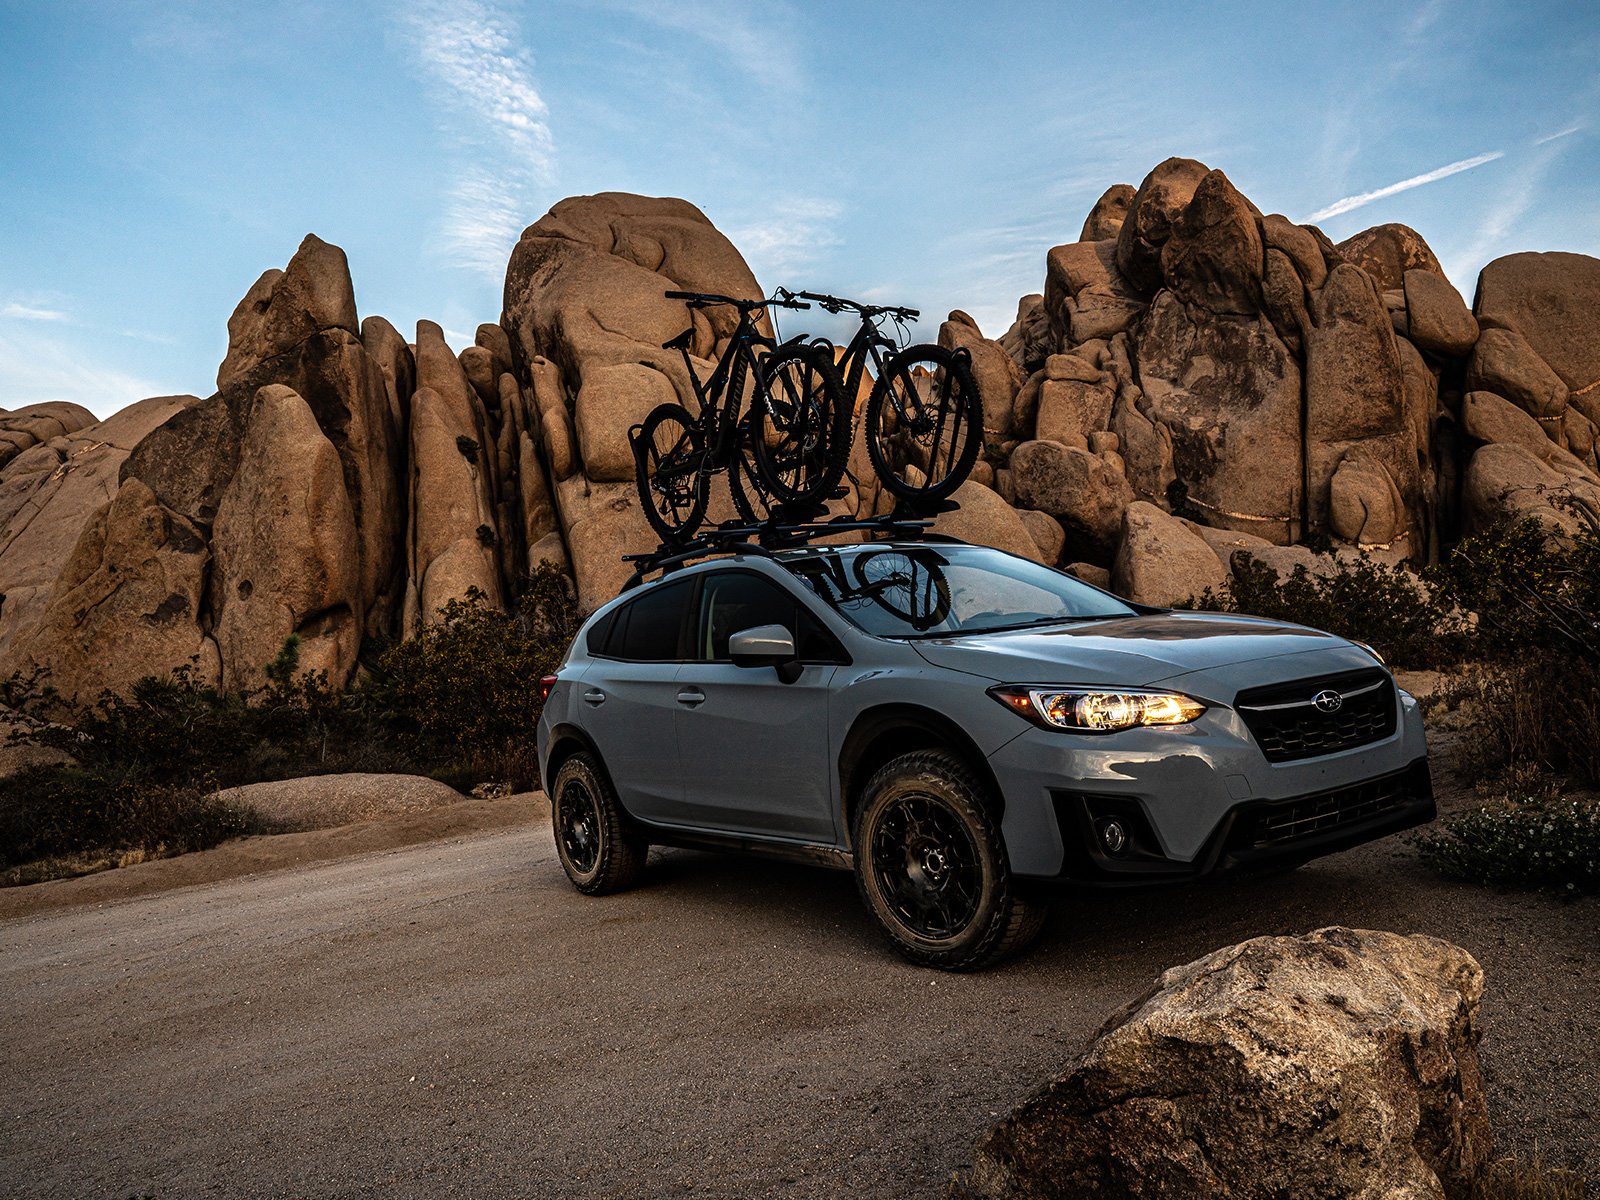 Falken Wildpeak tyres all terrain trails on a Subaru outback carrying mountain bikes on a gravel road